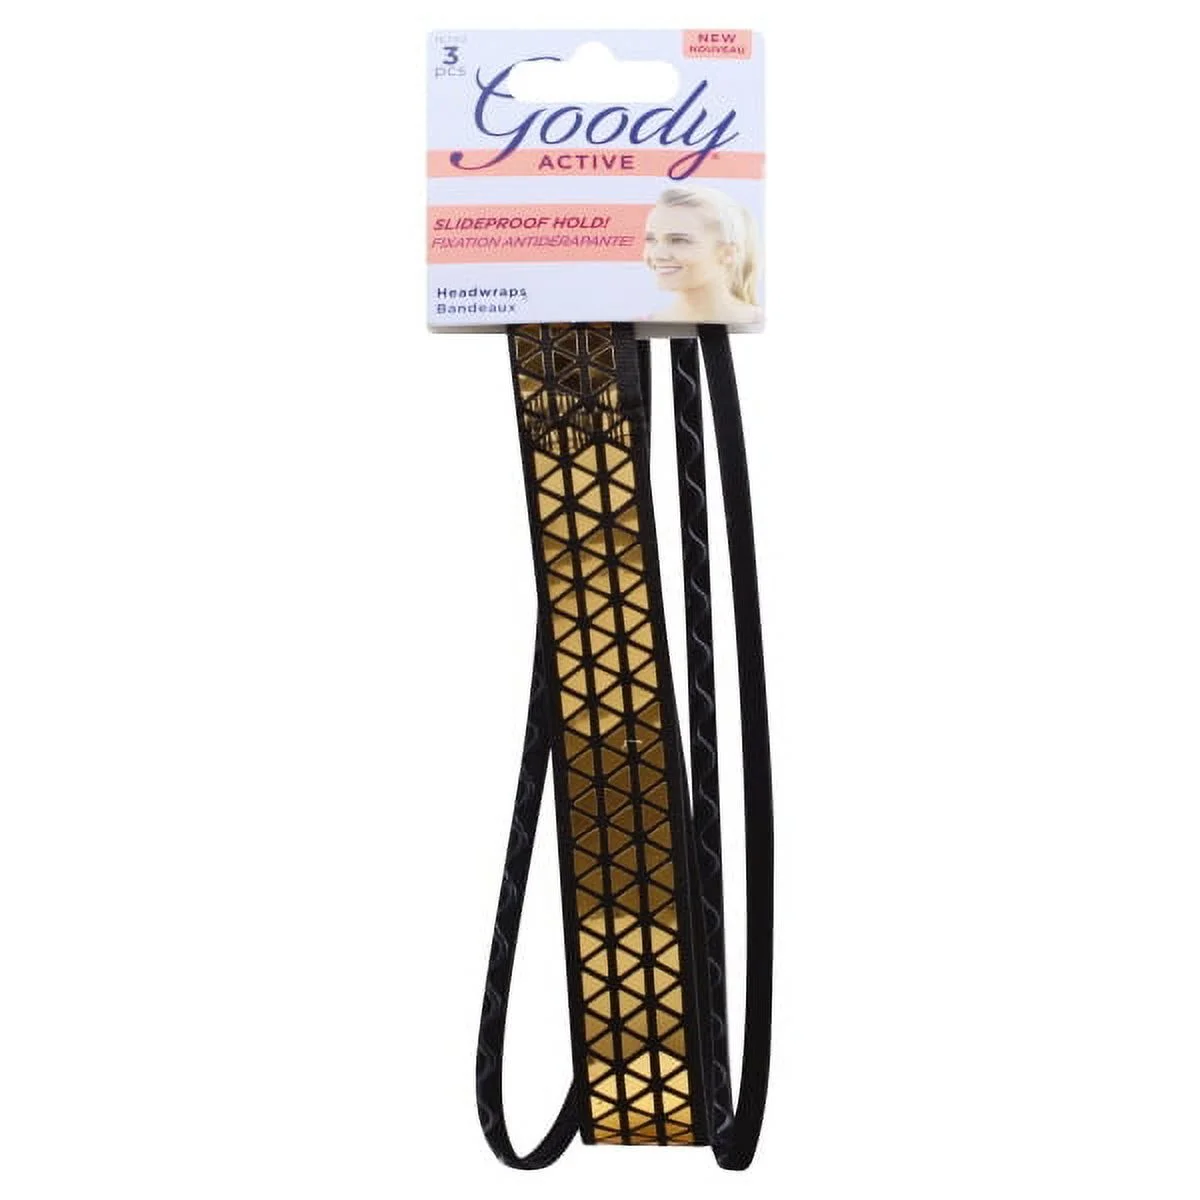 Goody Active Gold Headwrap Assort Colors UPC:041457167021 Pack:72/3